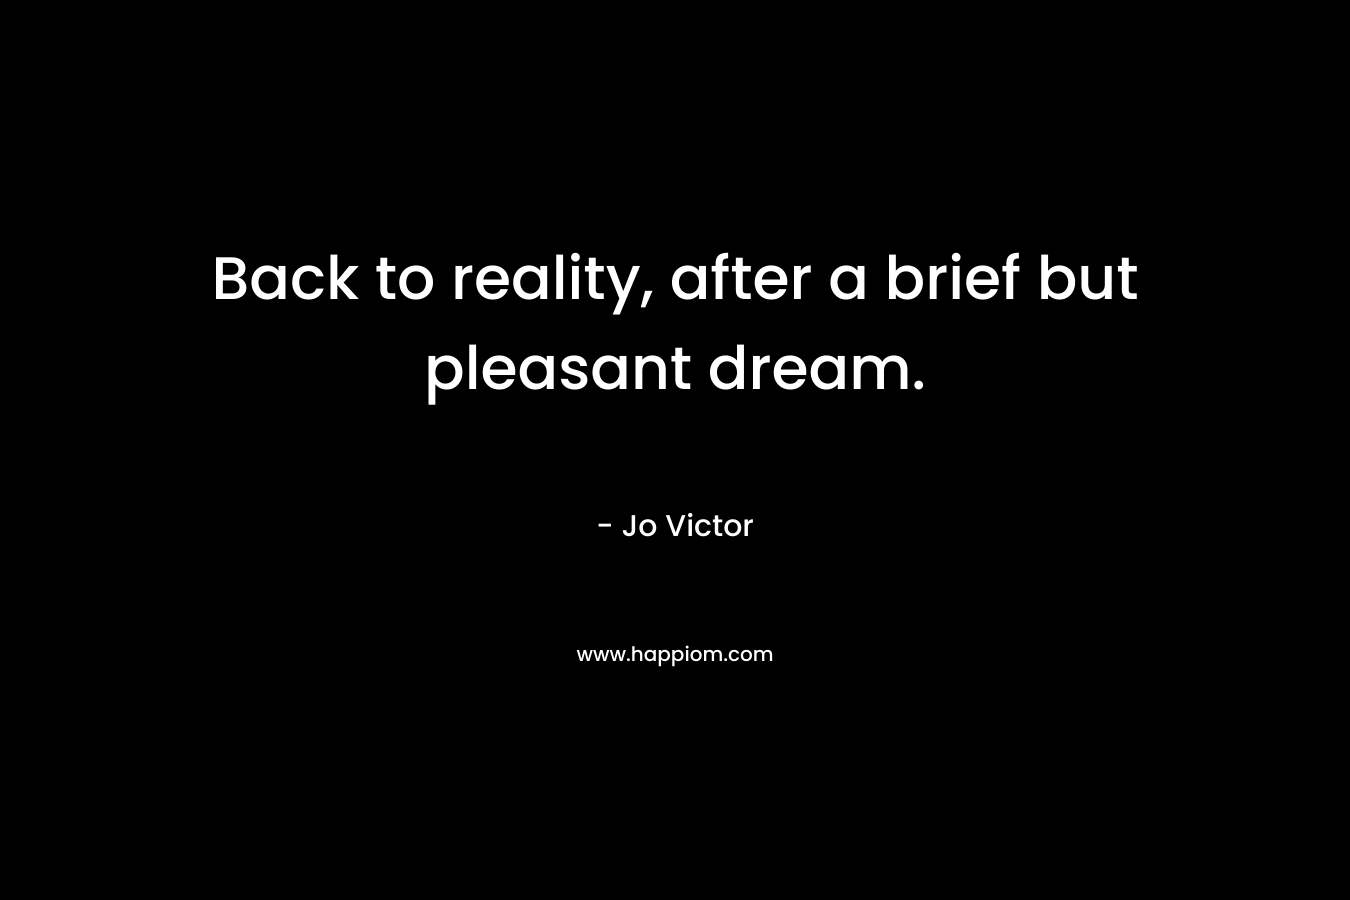 Back to reality, after a brief but pleasant dream. – Jo Victor